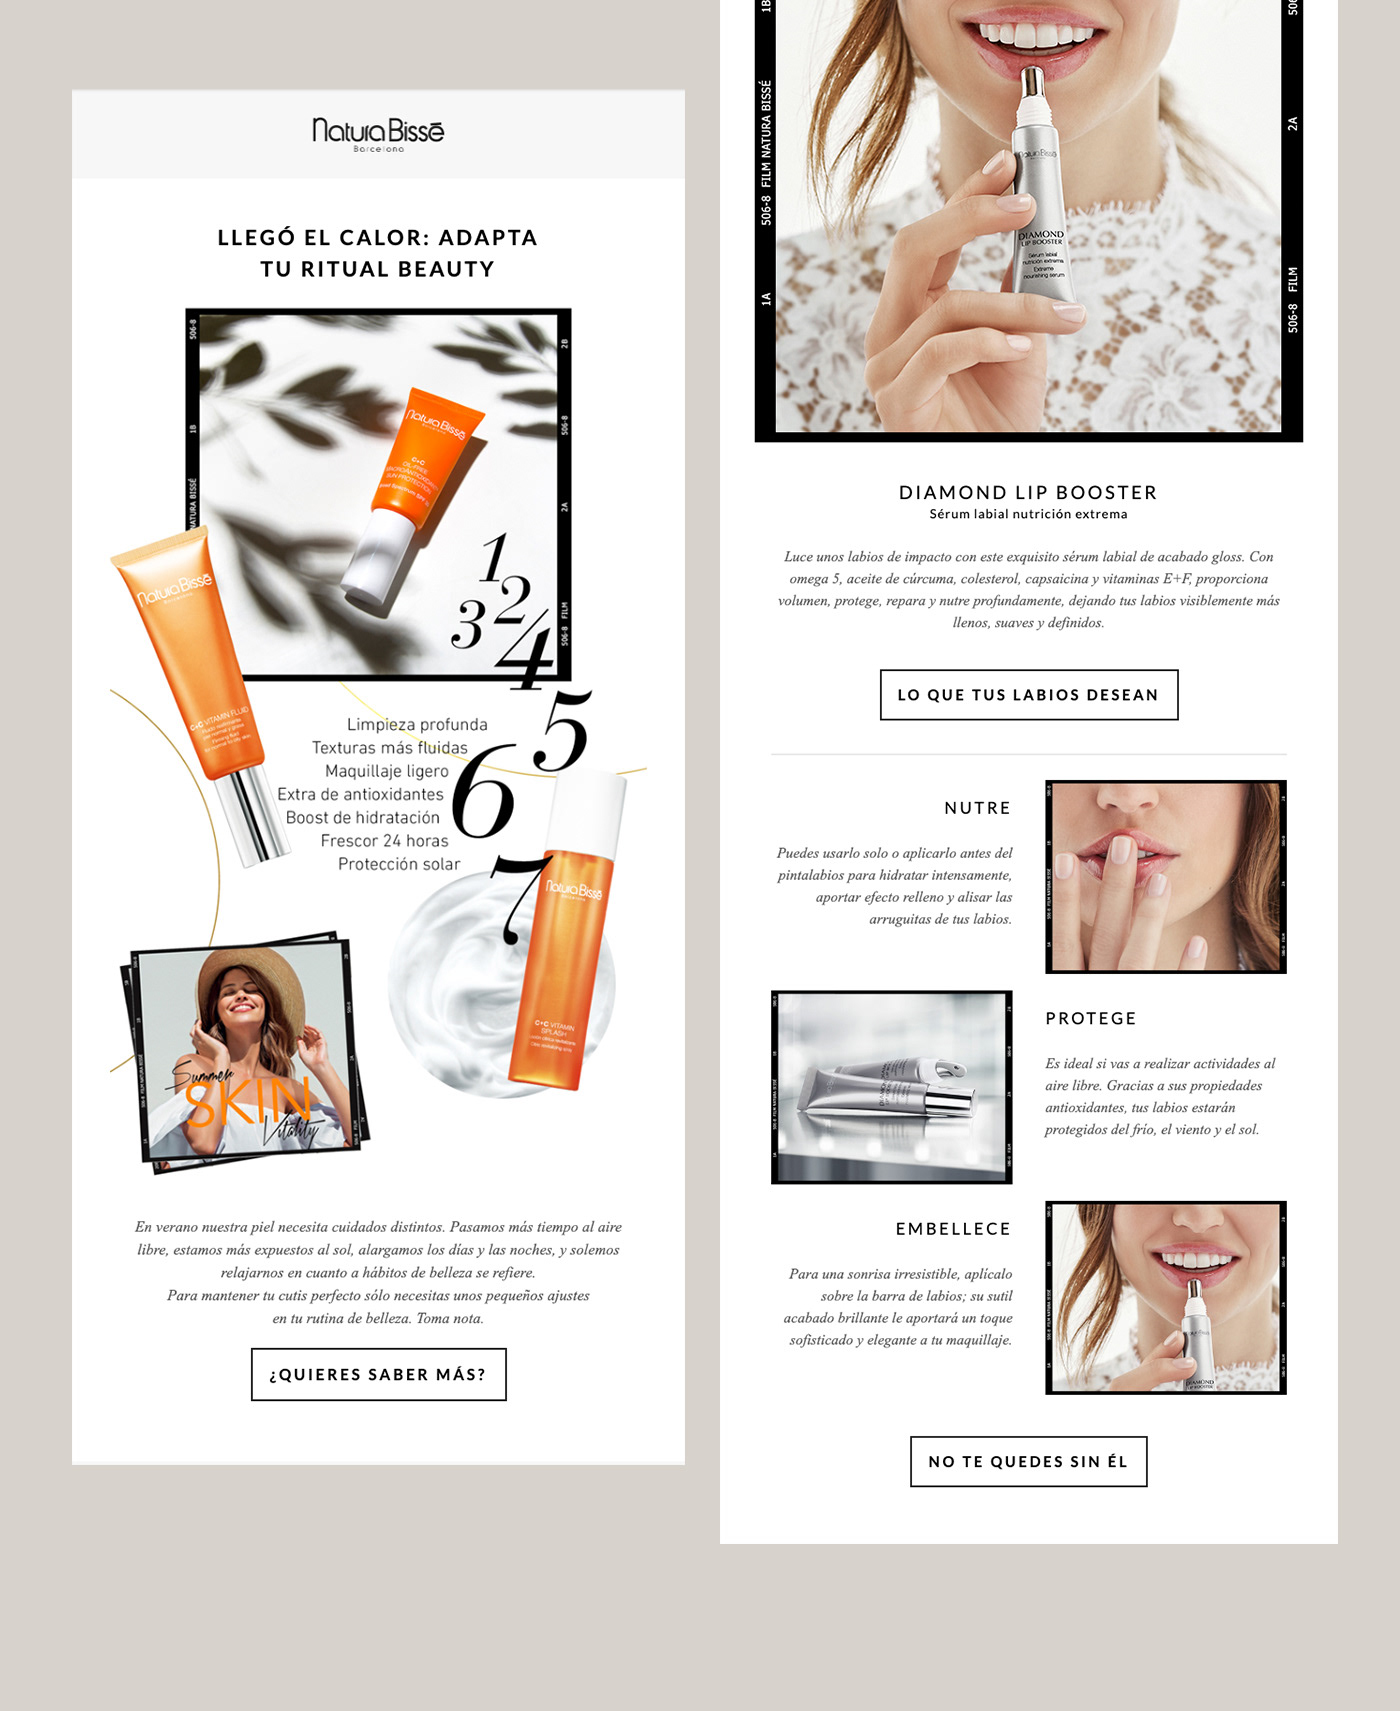 email marketing mailchimp emailing ux Fotografia newsletter lujo cosmetica